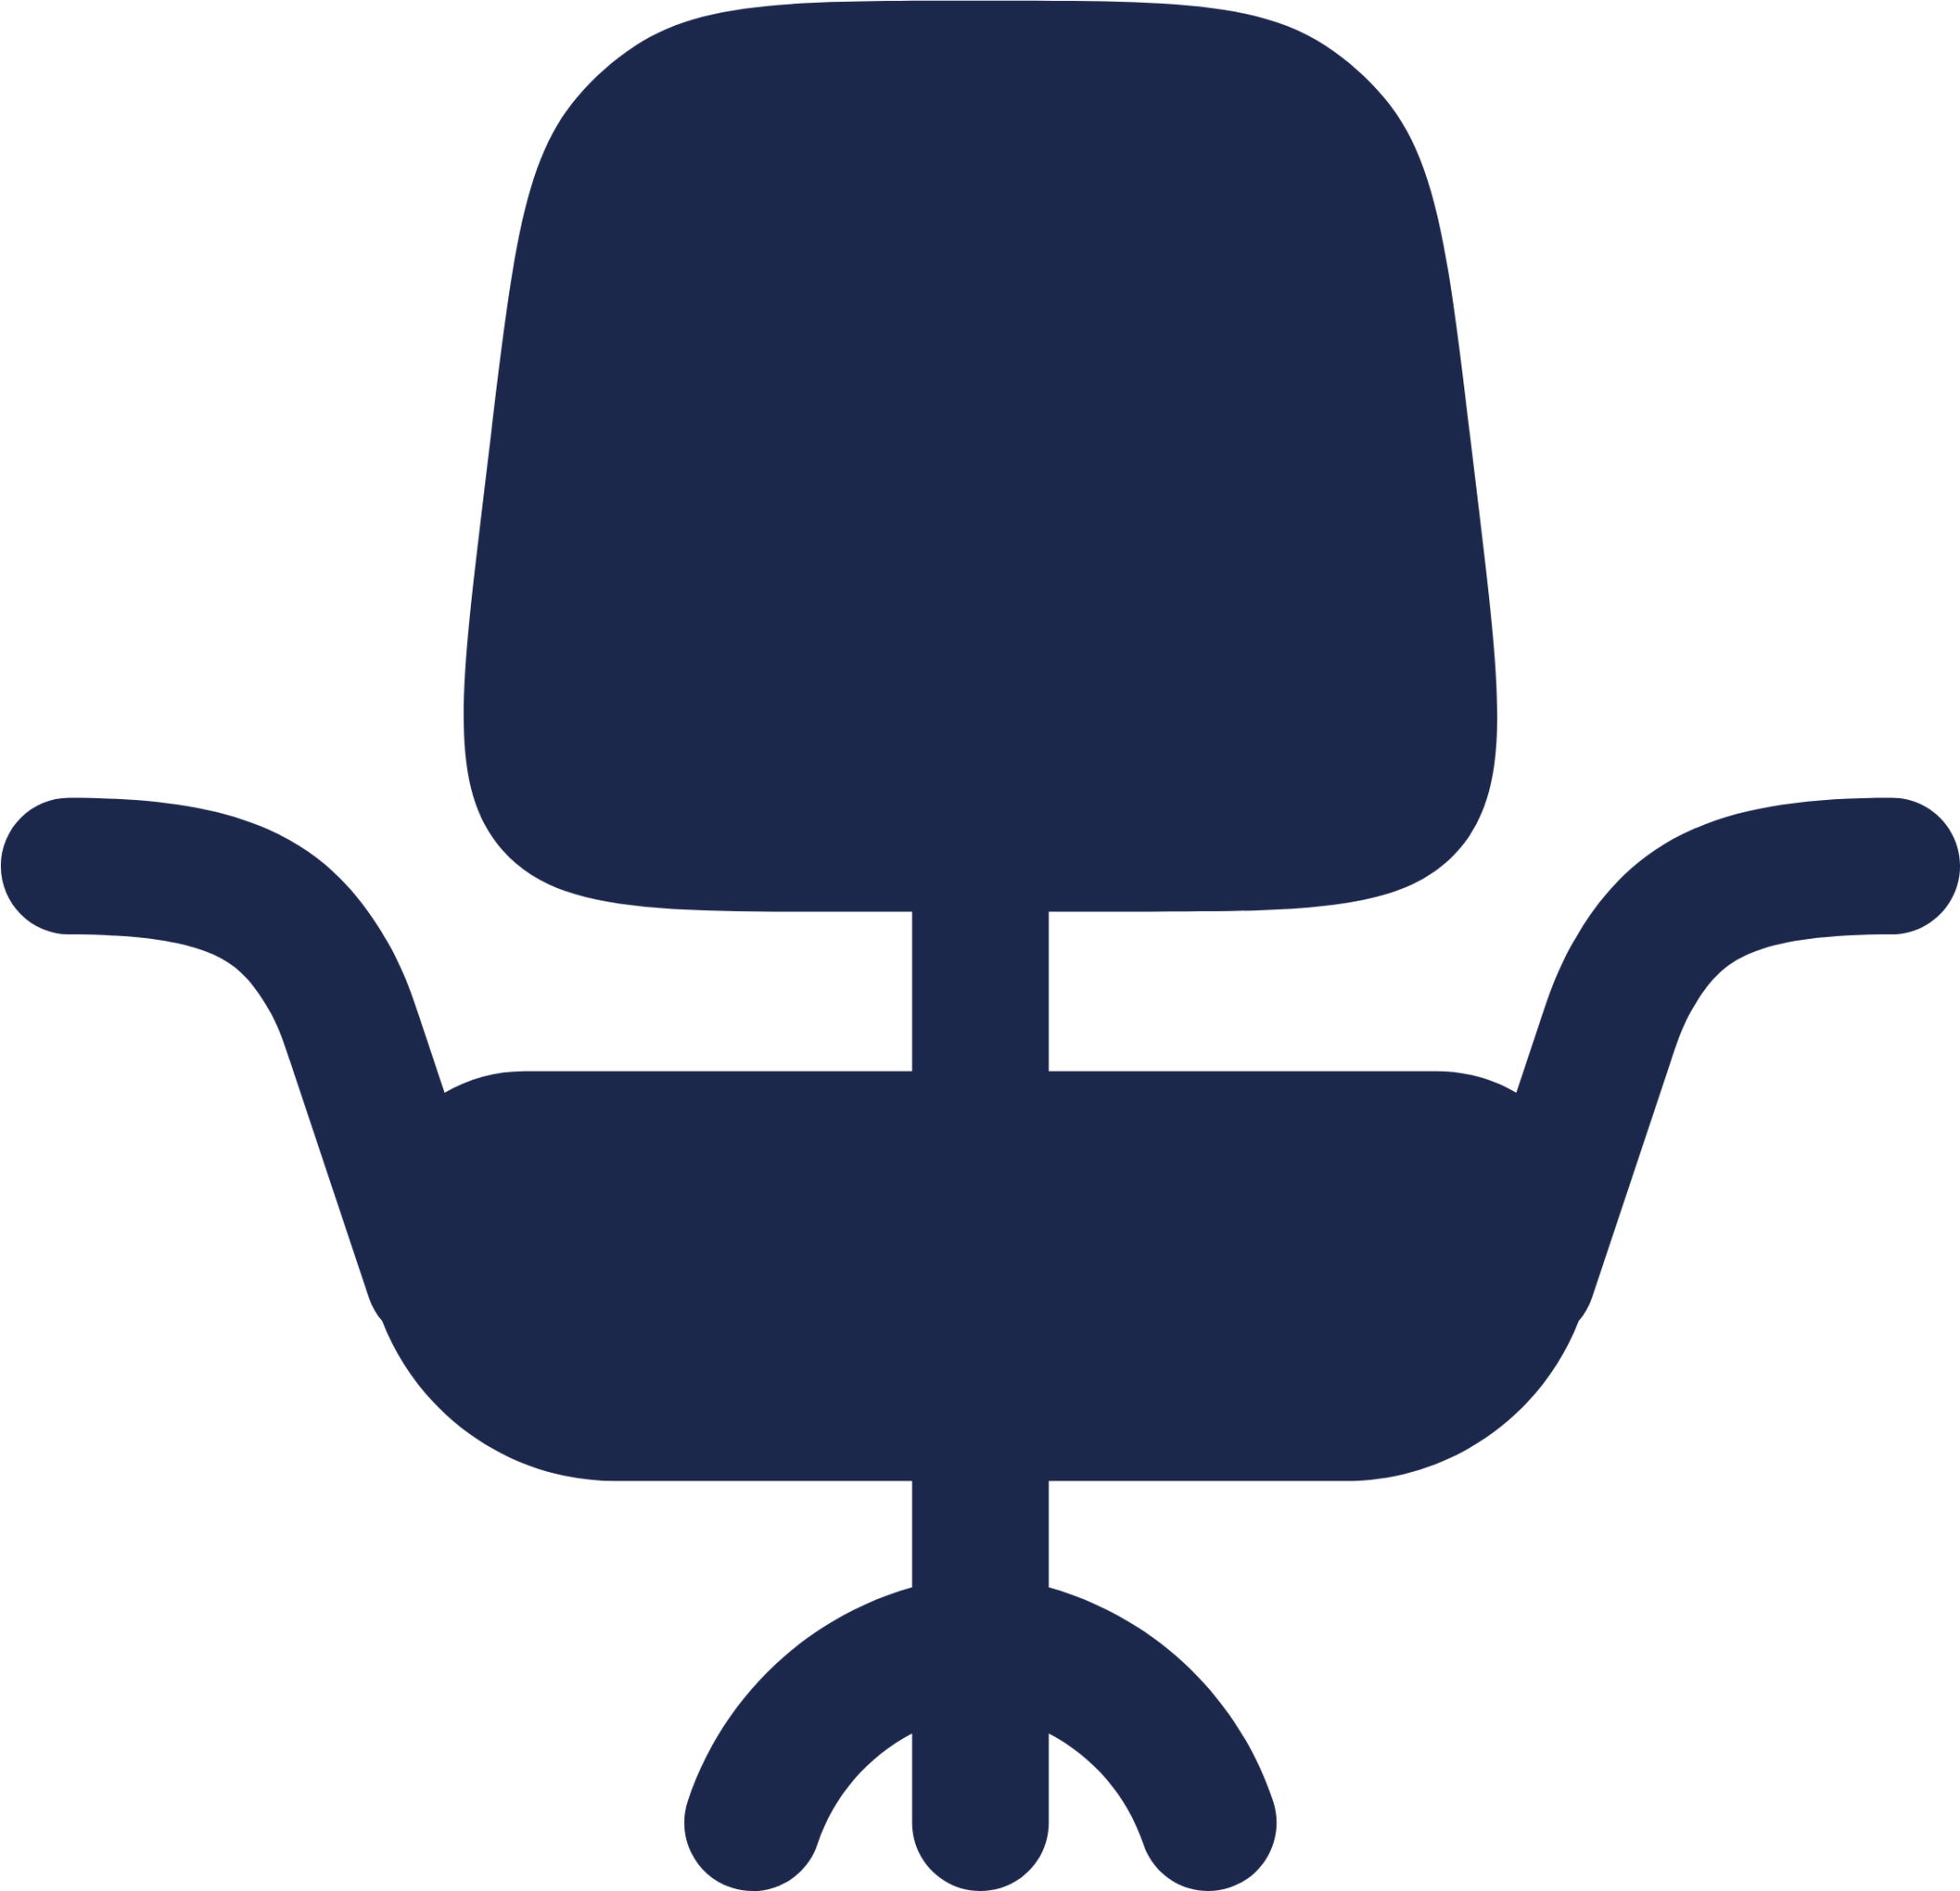 Chair 2 icon